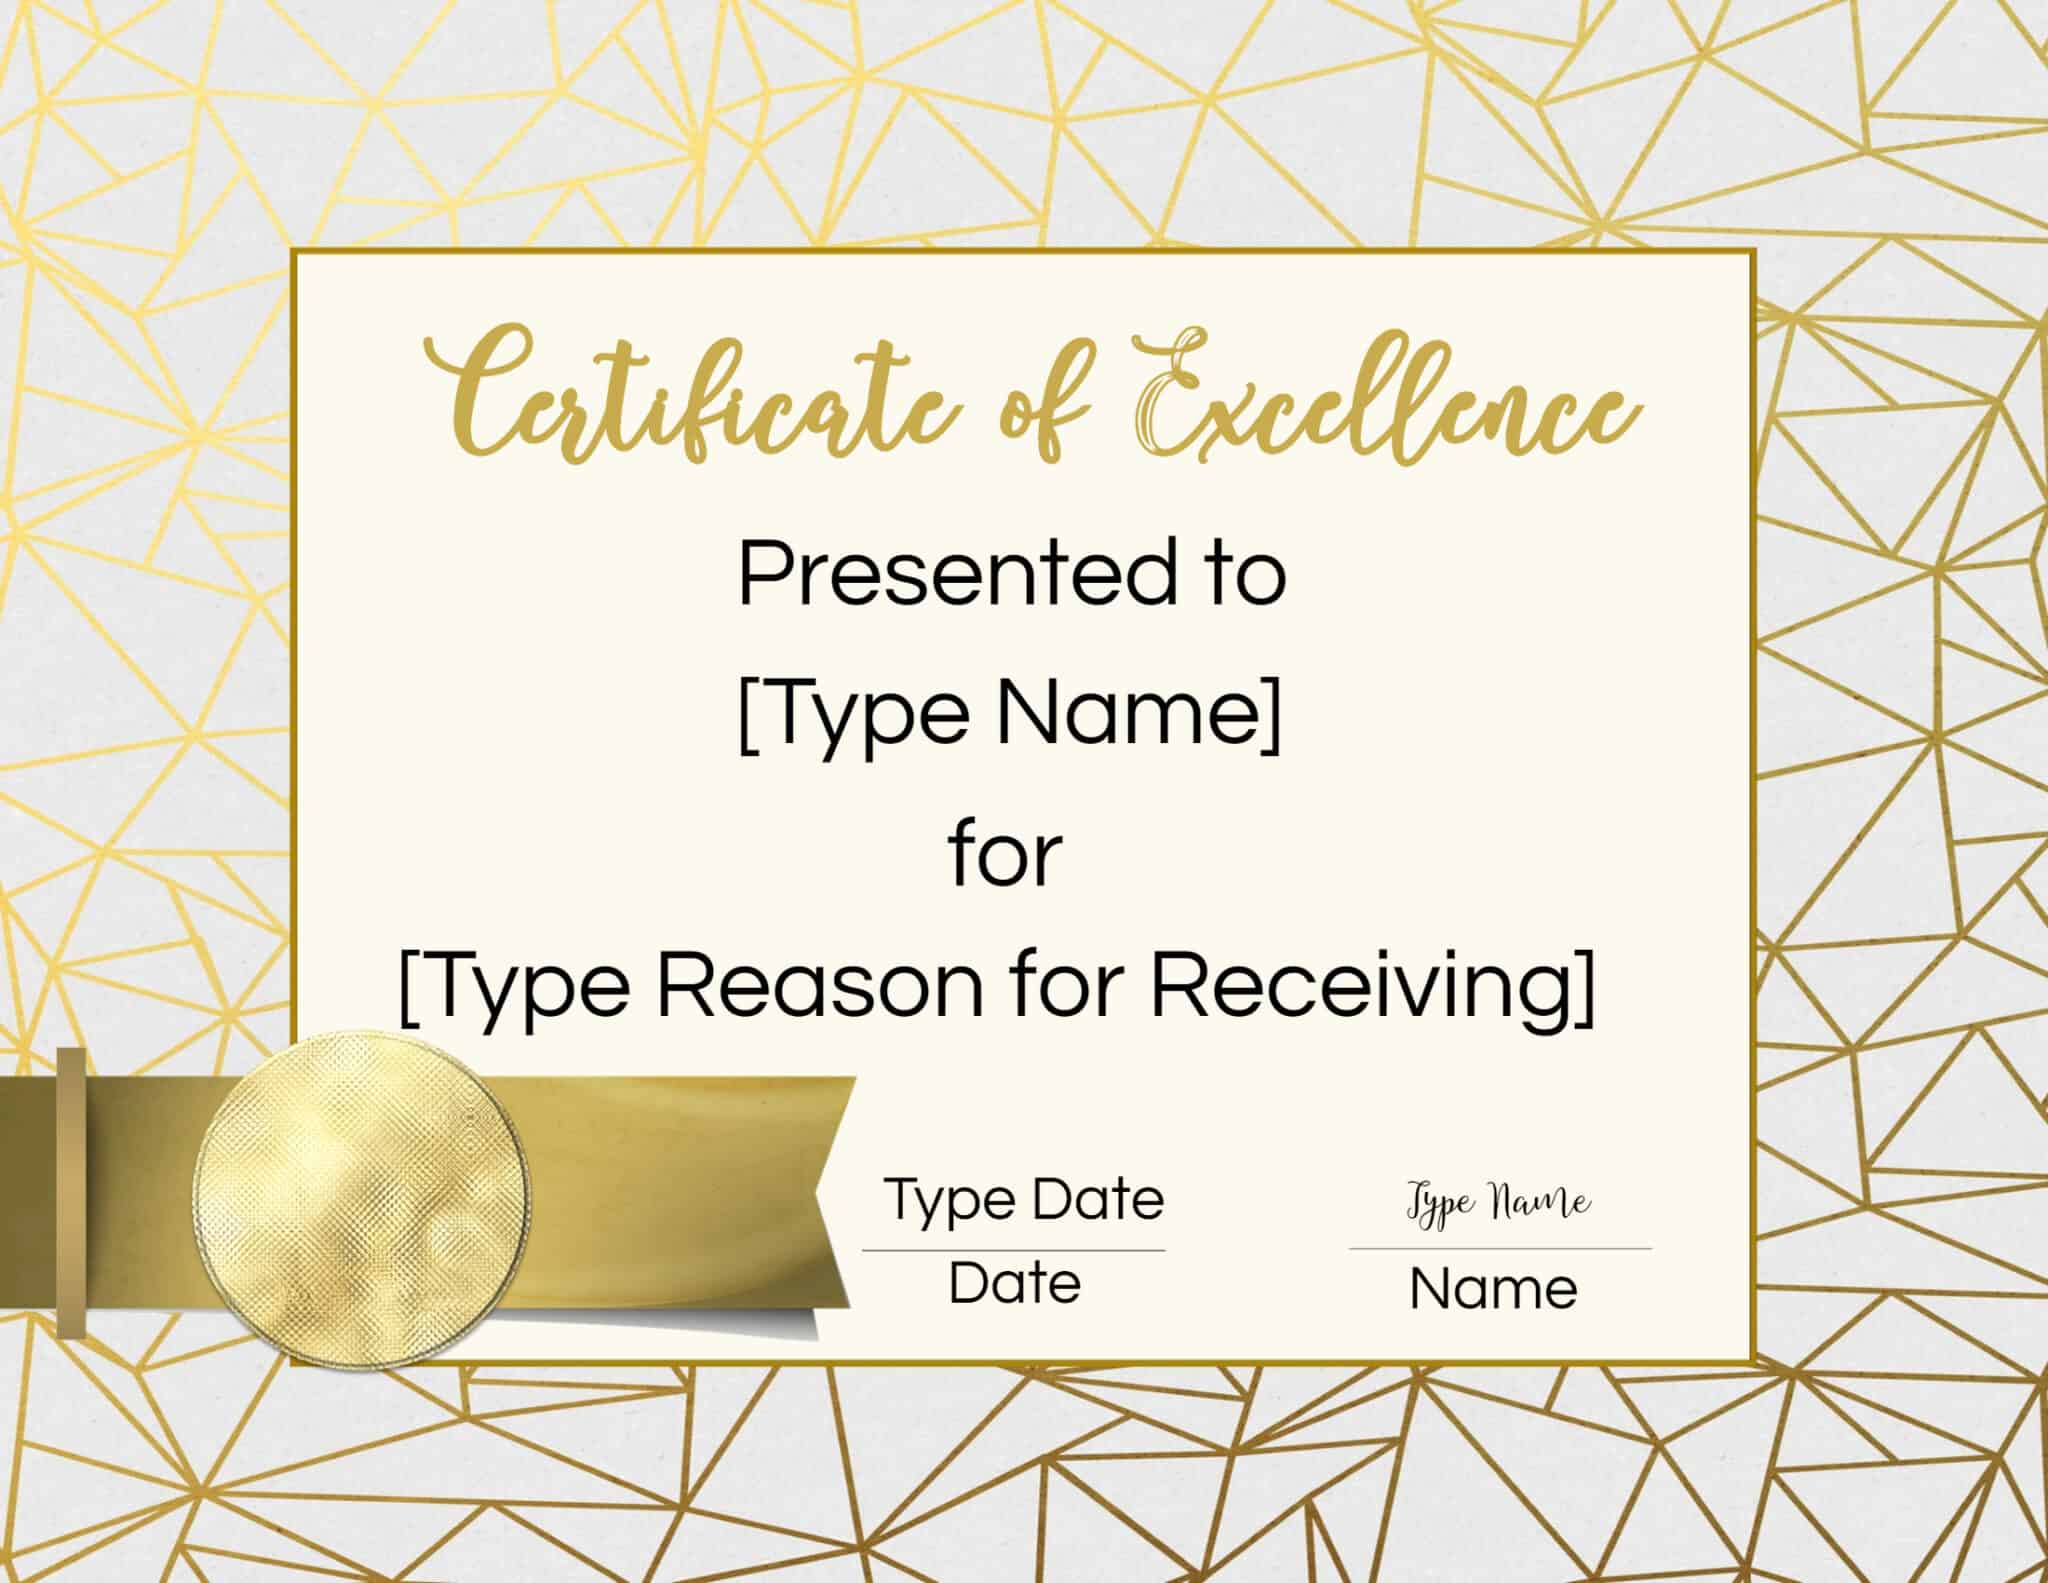 FREE Certificate Of Excellence Editable And Printable